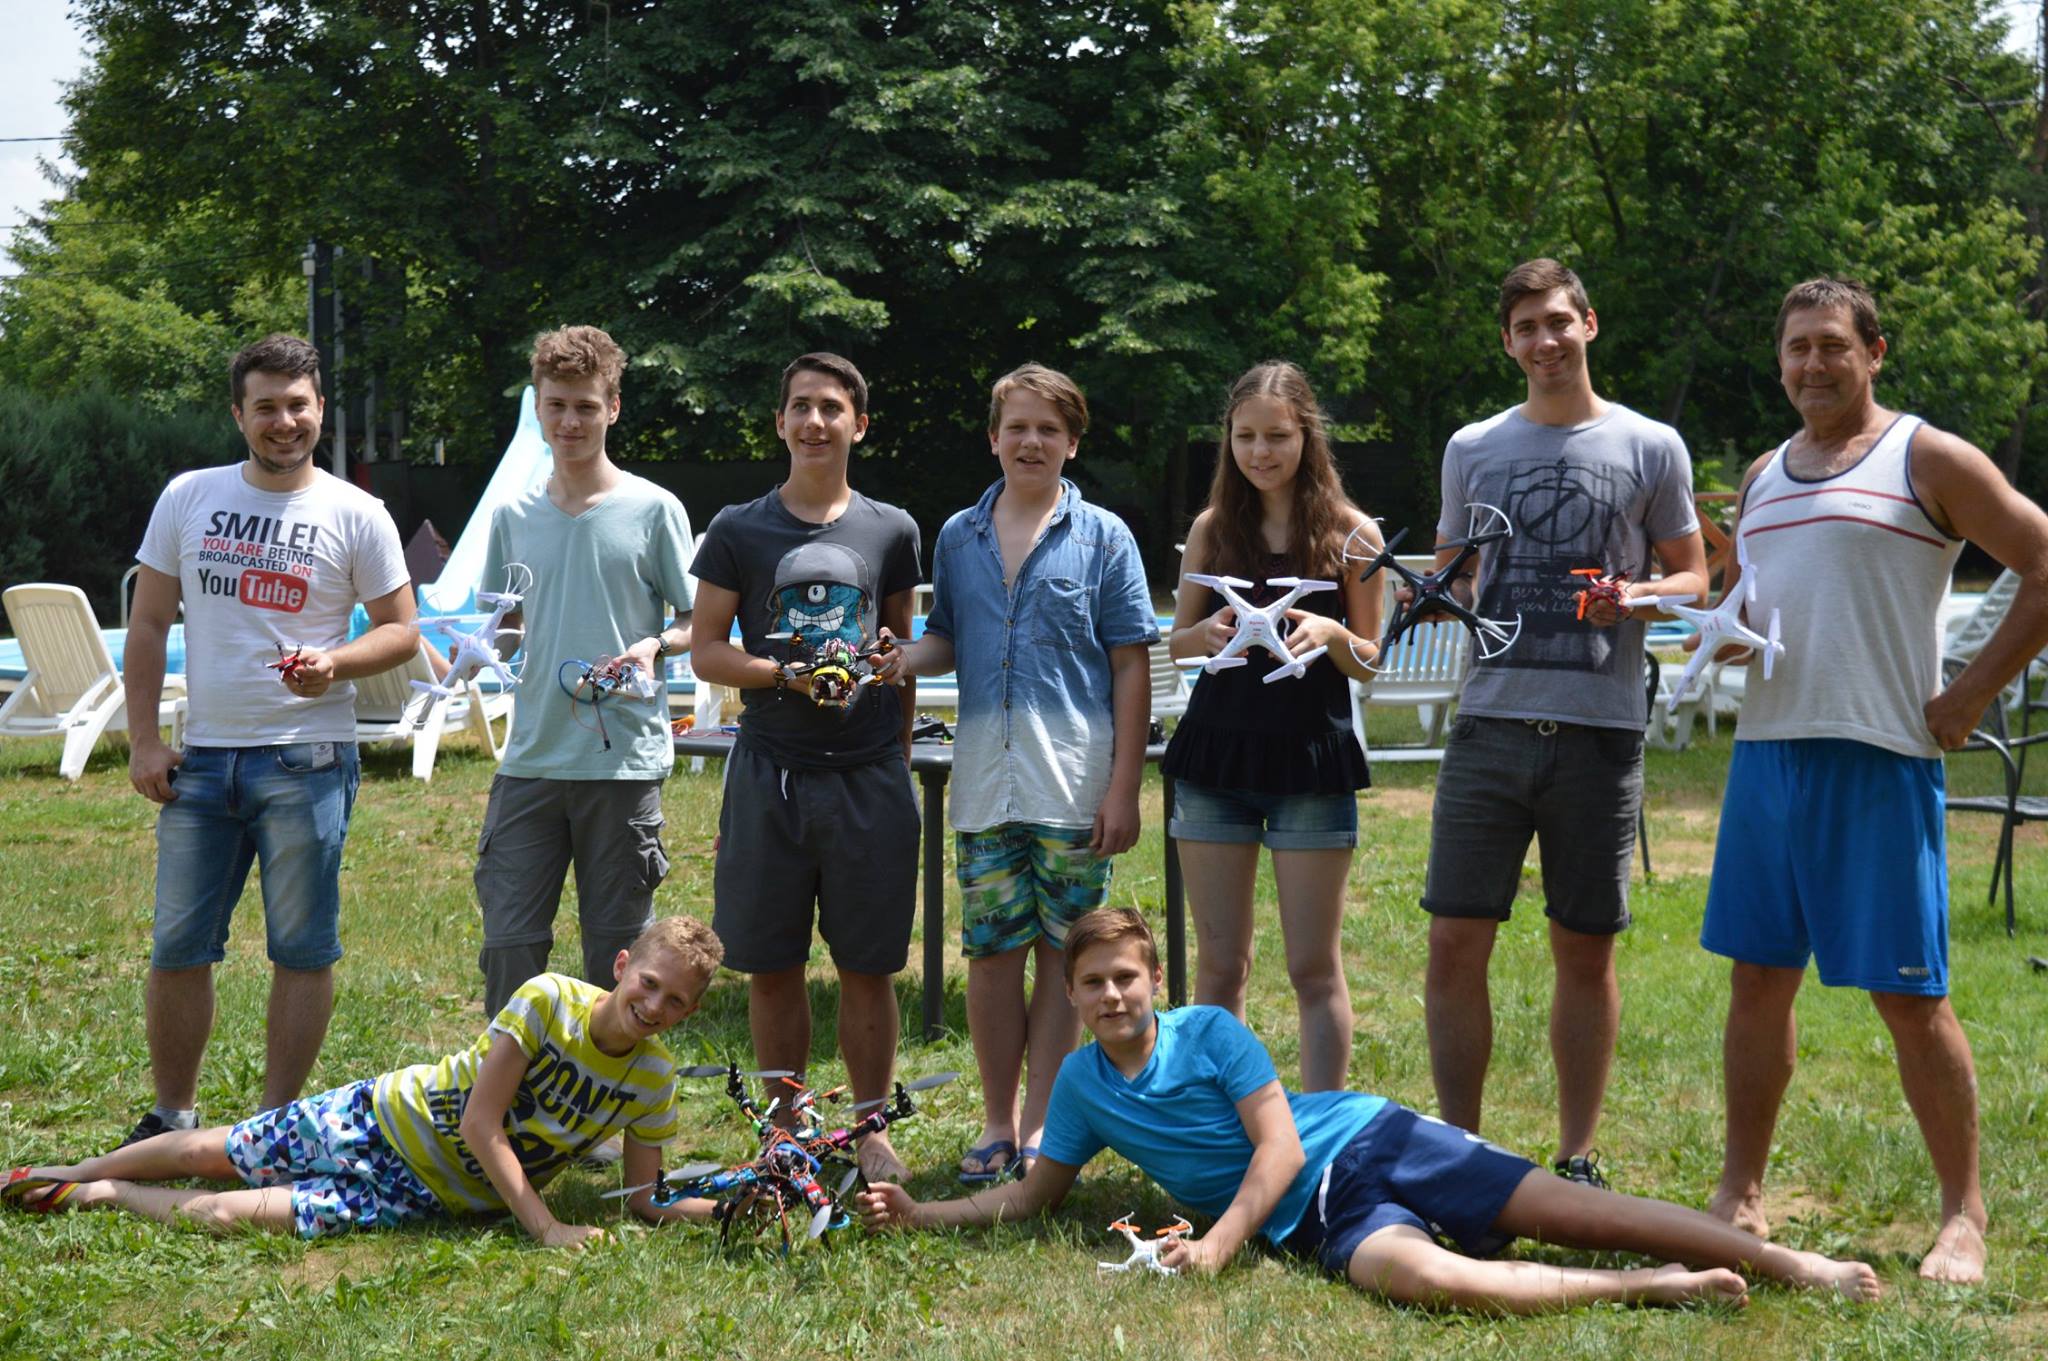 Group photo of campers with their drones